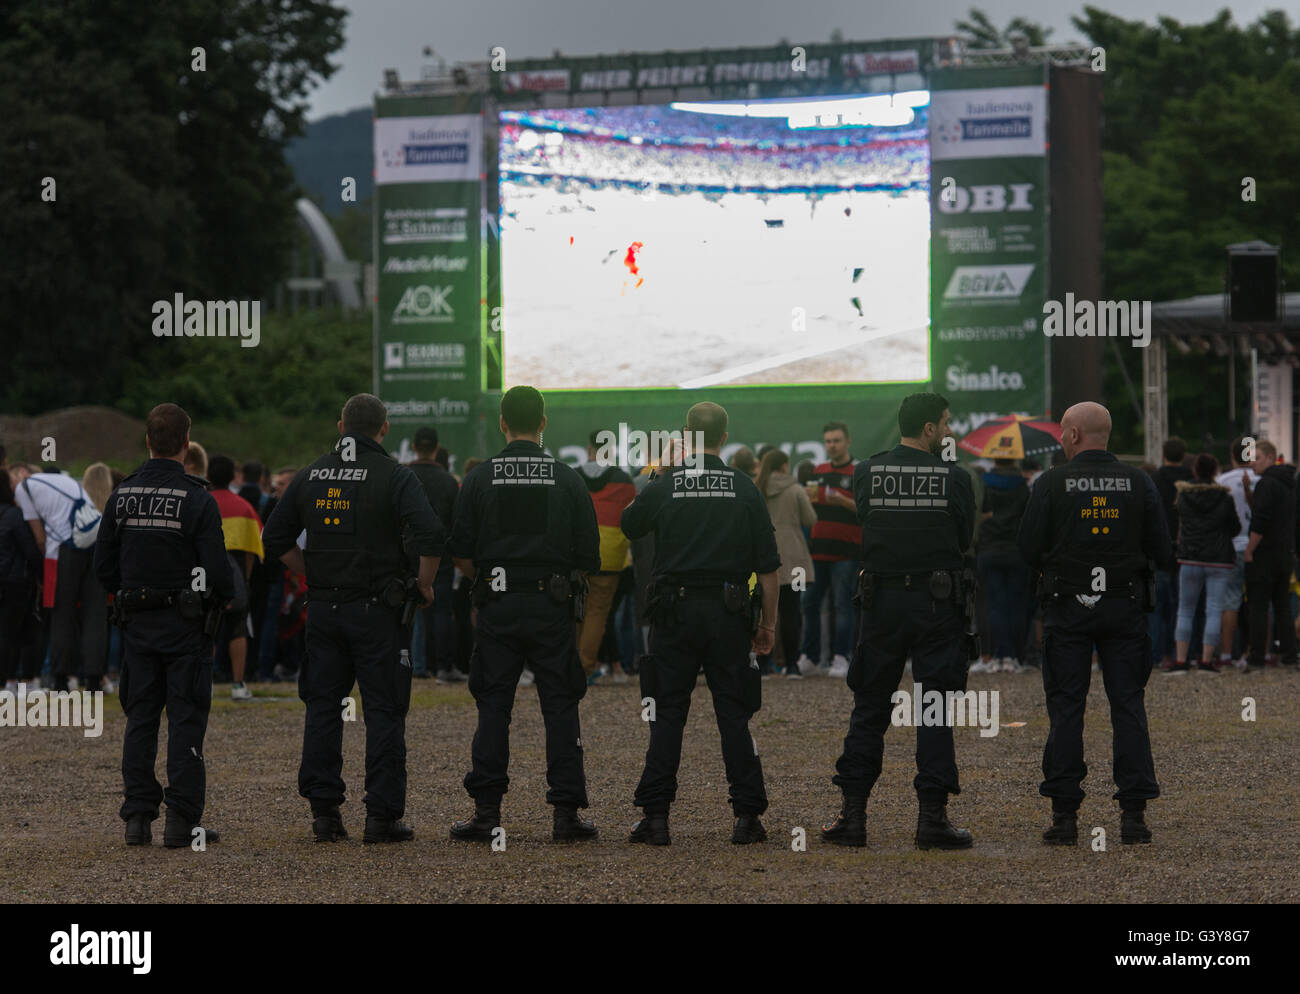 Freiburg, Germany. 16th June, 2016. Policeman watch the soccer match Germany vs Poland in the rain at a public screening event on the fair grounds in Freiburg, Germany, 16 June 2016. Photo: Patrick Seeger/dpa/Alamy Live News Stock Photo